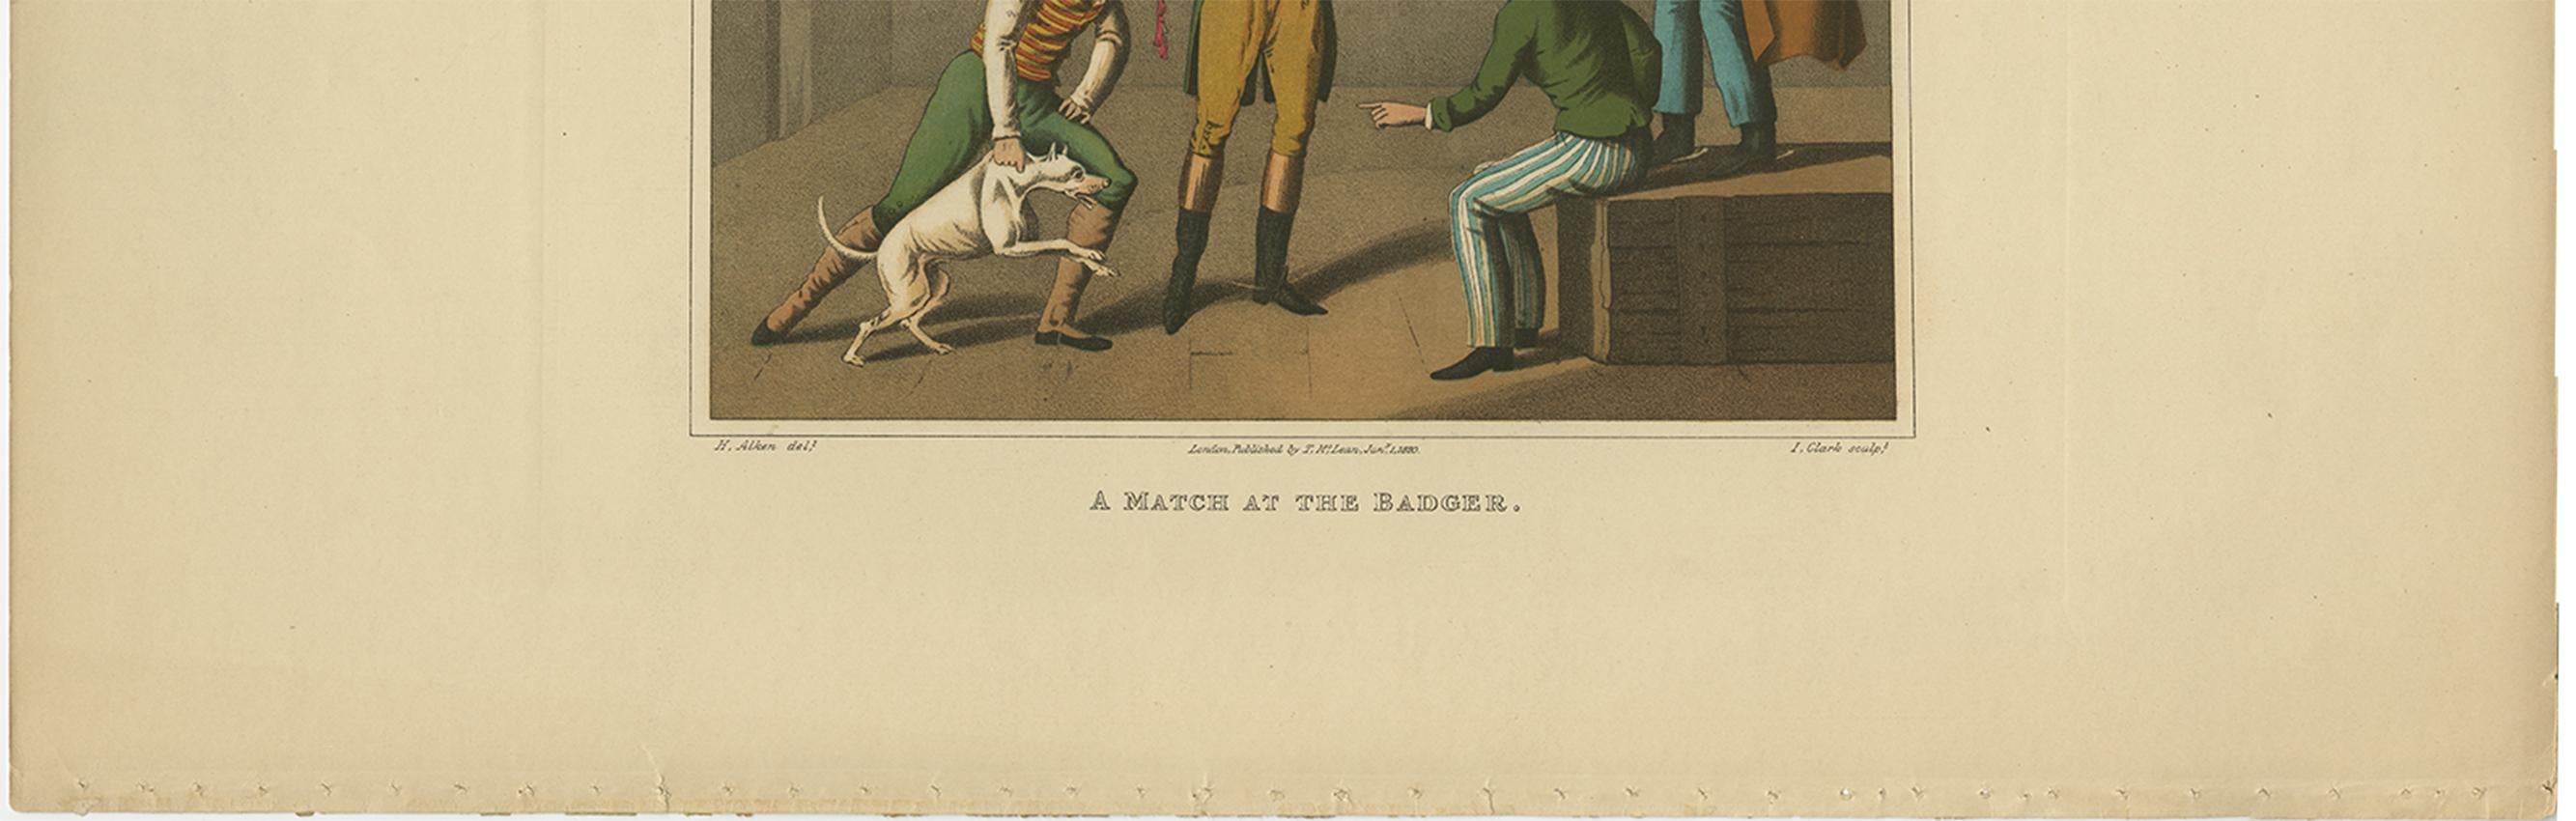 19th Century Antique Aquatint 'A Match at the Badger' by J. Clark, 1820 For Sale